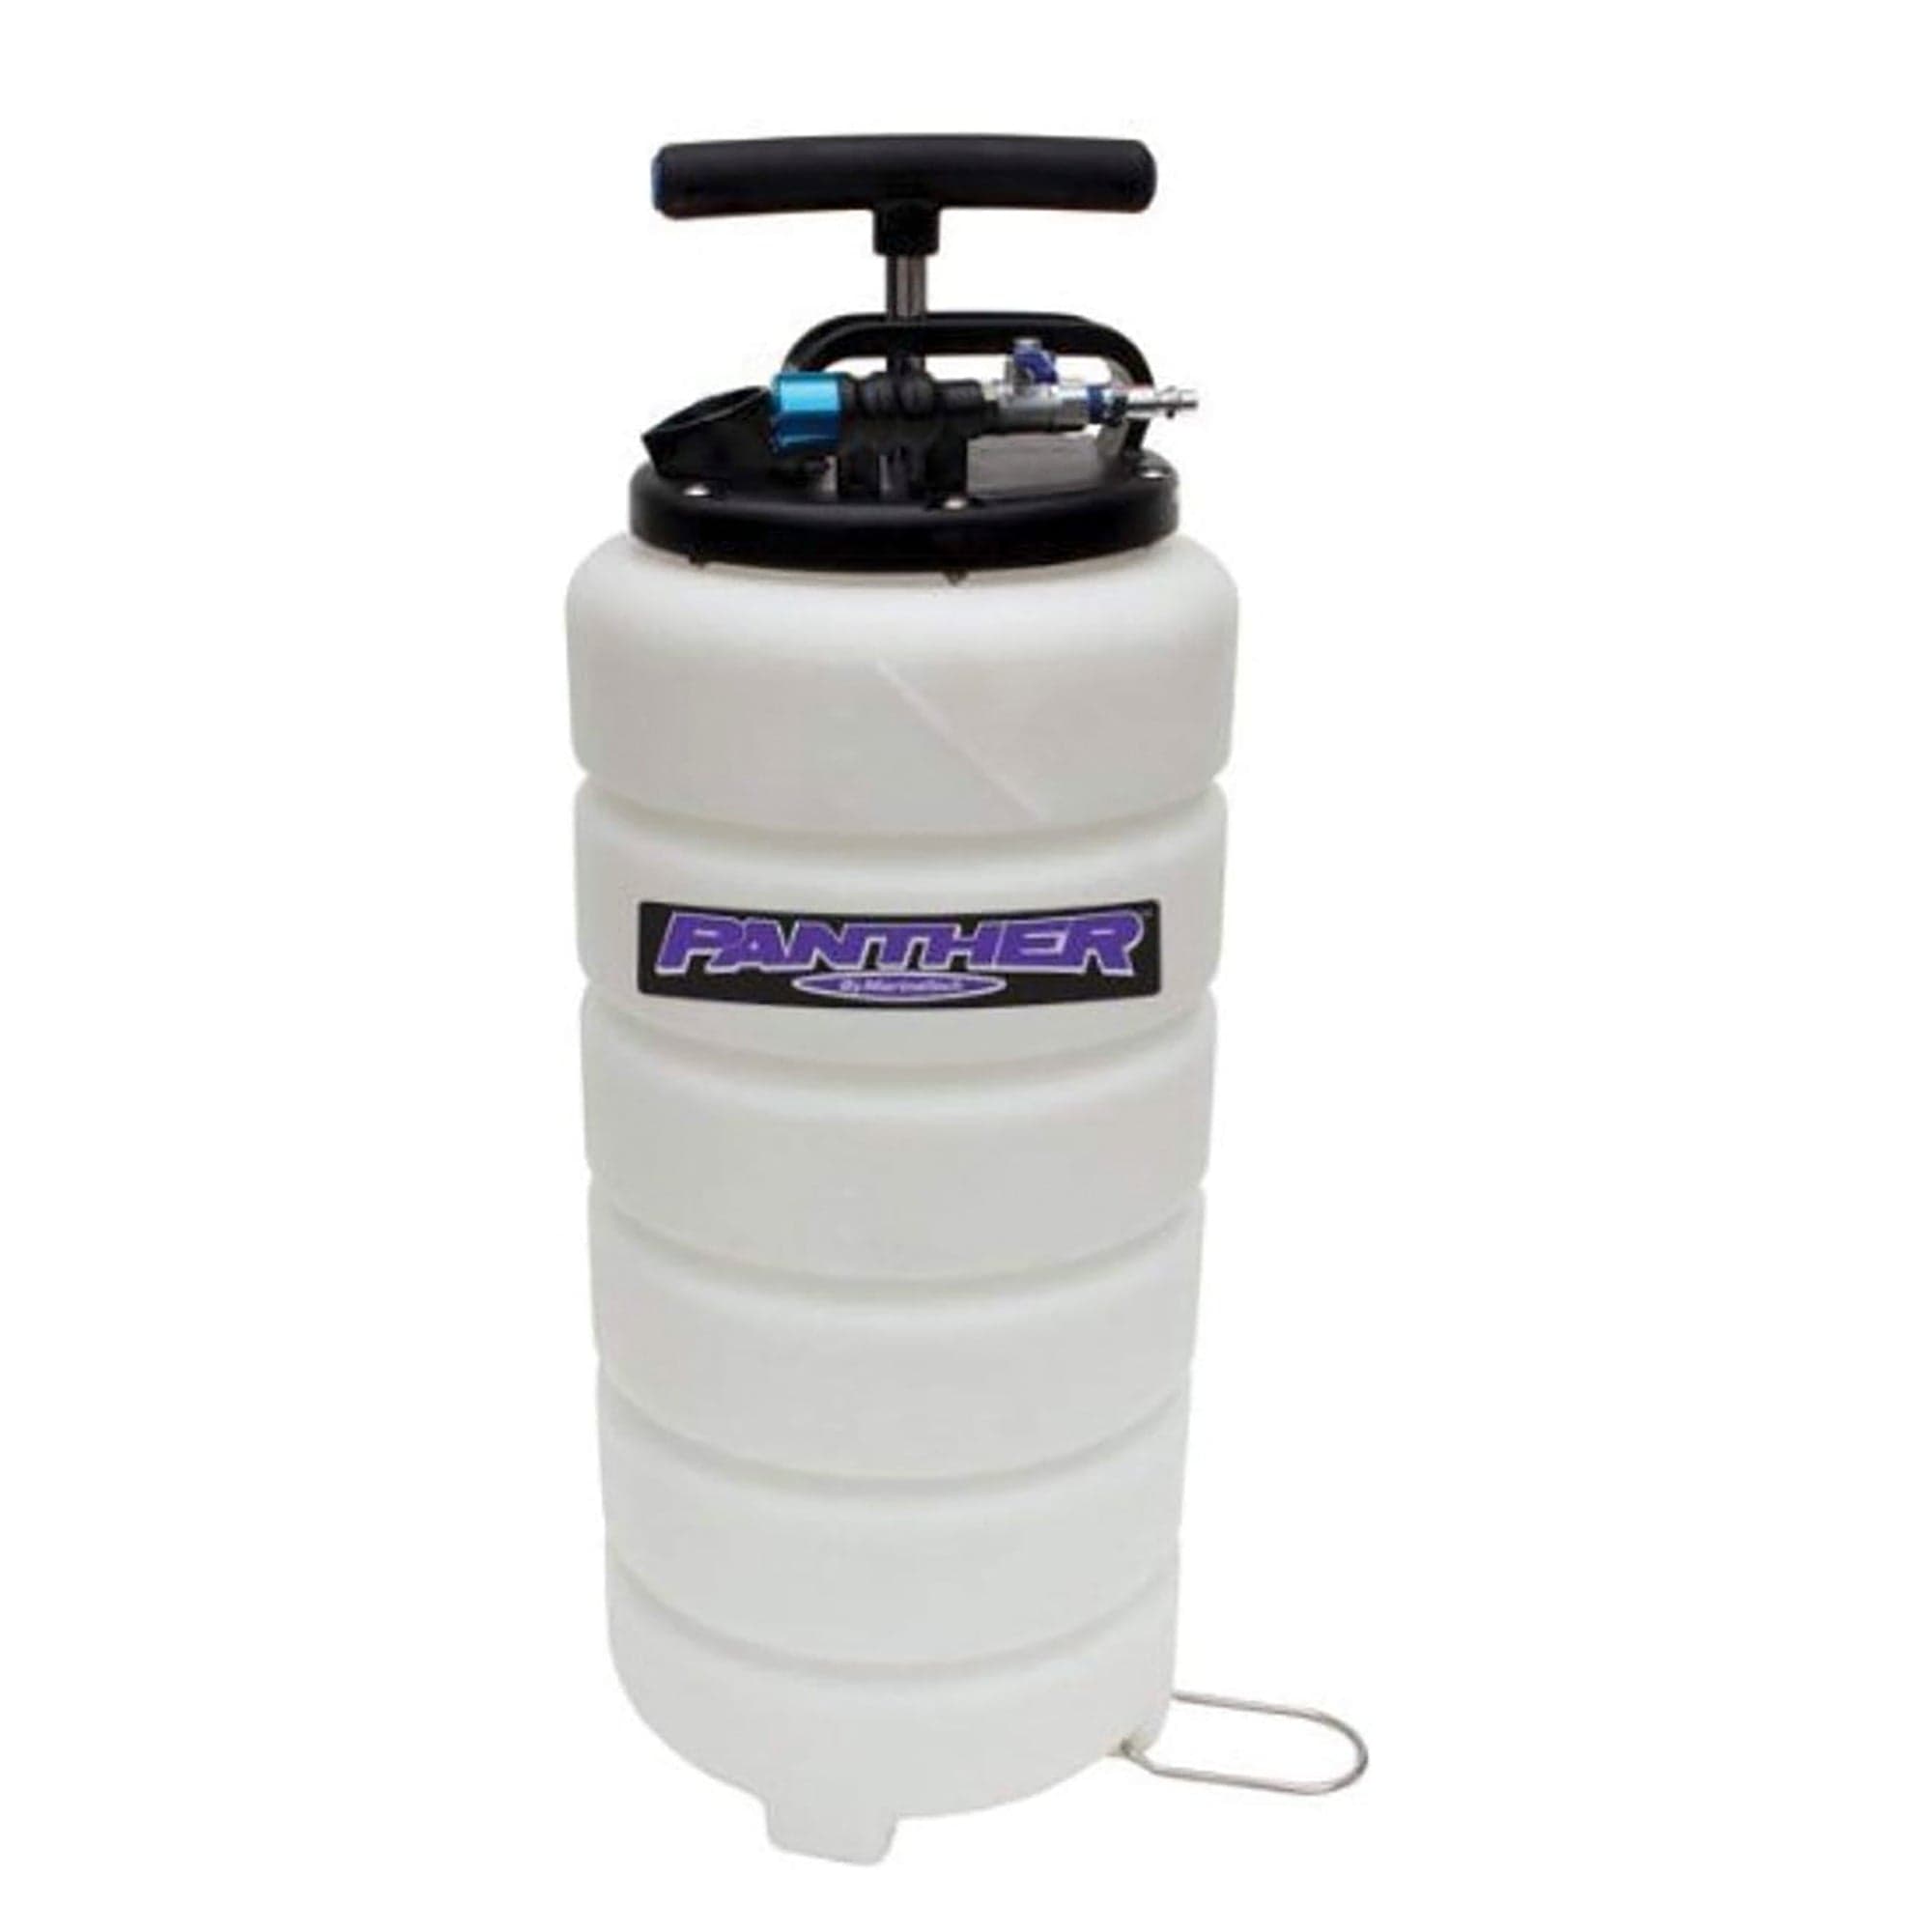 Panther 756015P 15 Liter Oil Extractor Pro Series Pneumatic, 1/4", 40-170 psi